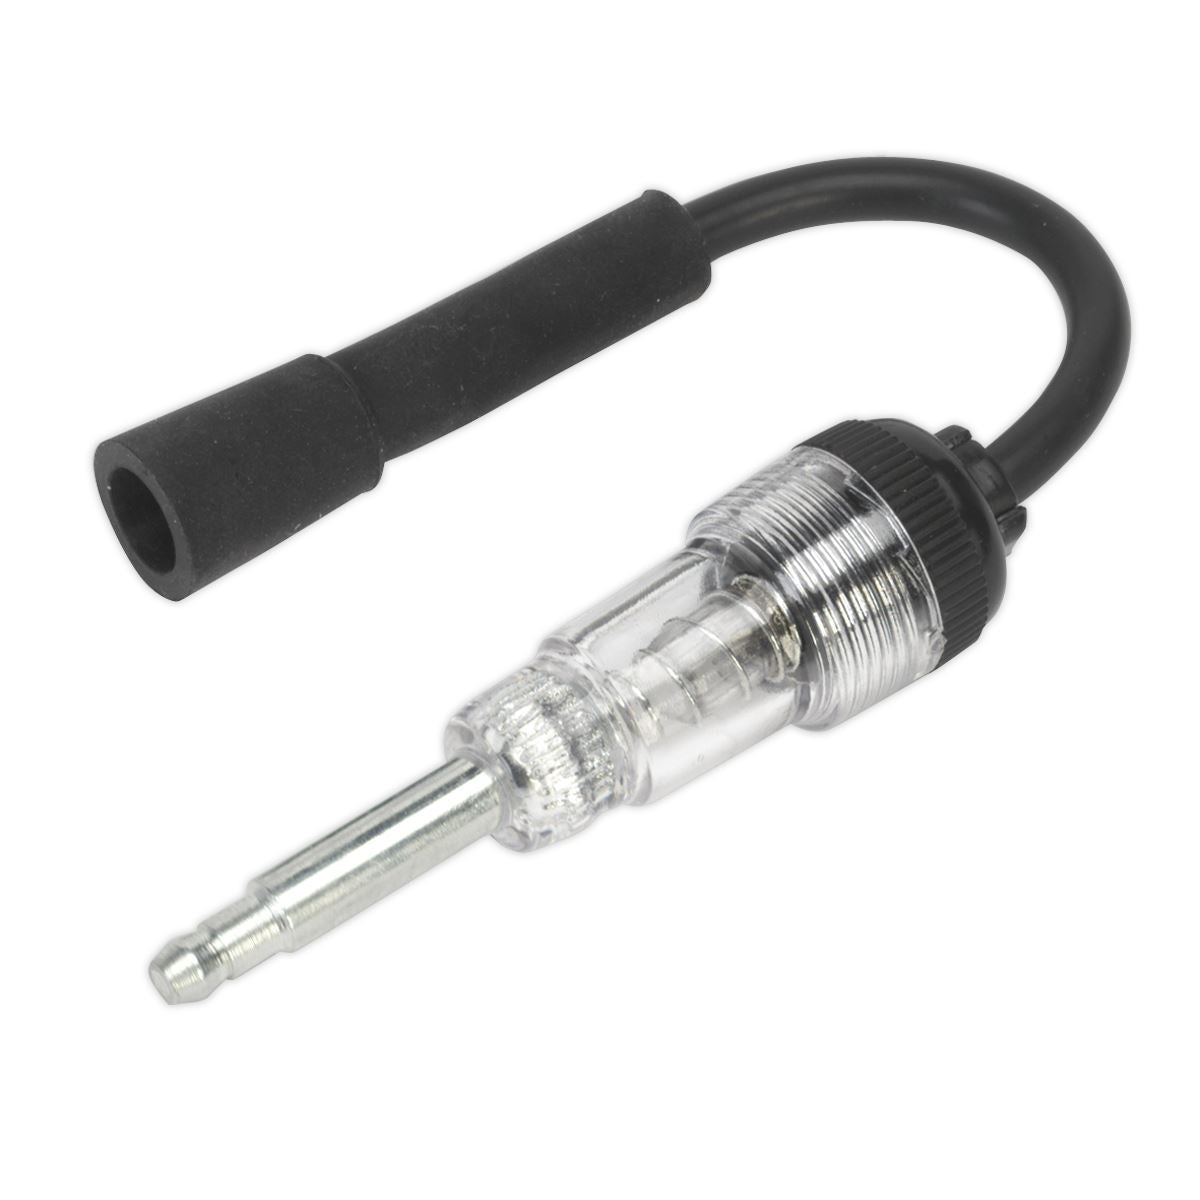 Sealey In-Line Ignition Spark Tester